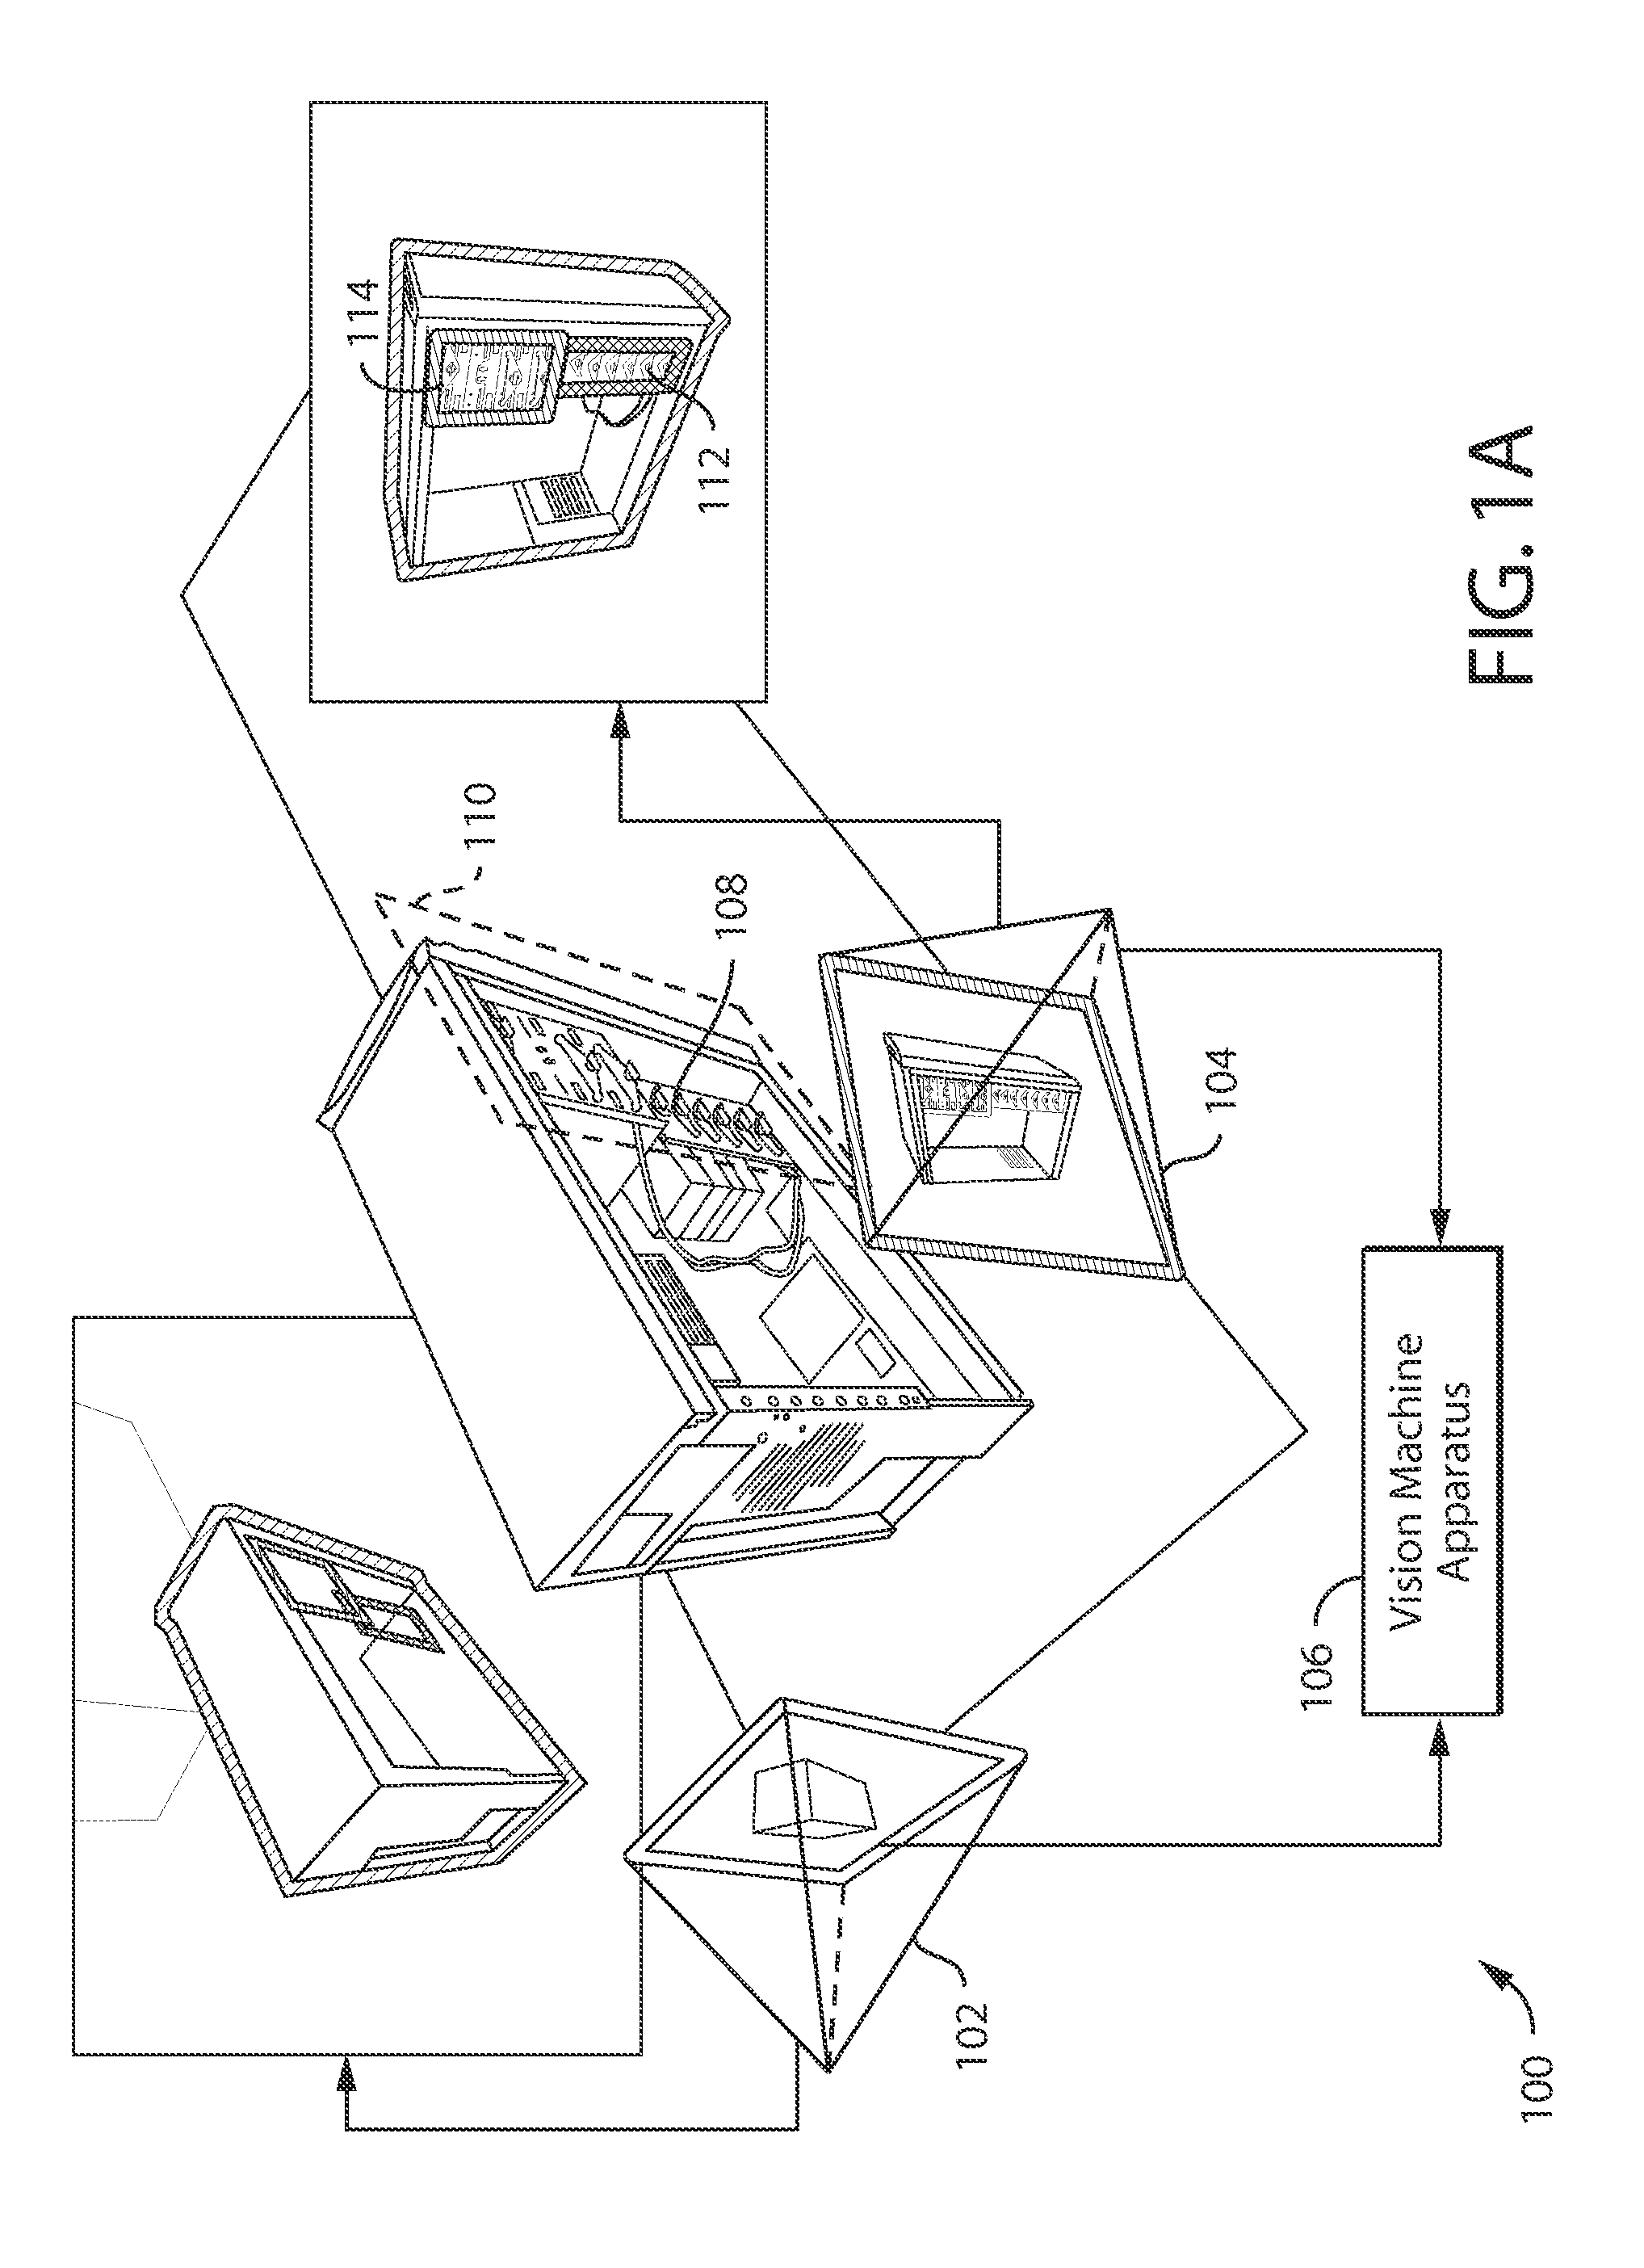 Inspection apparatus, method, and computer program product for machine vision inspection